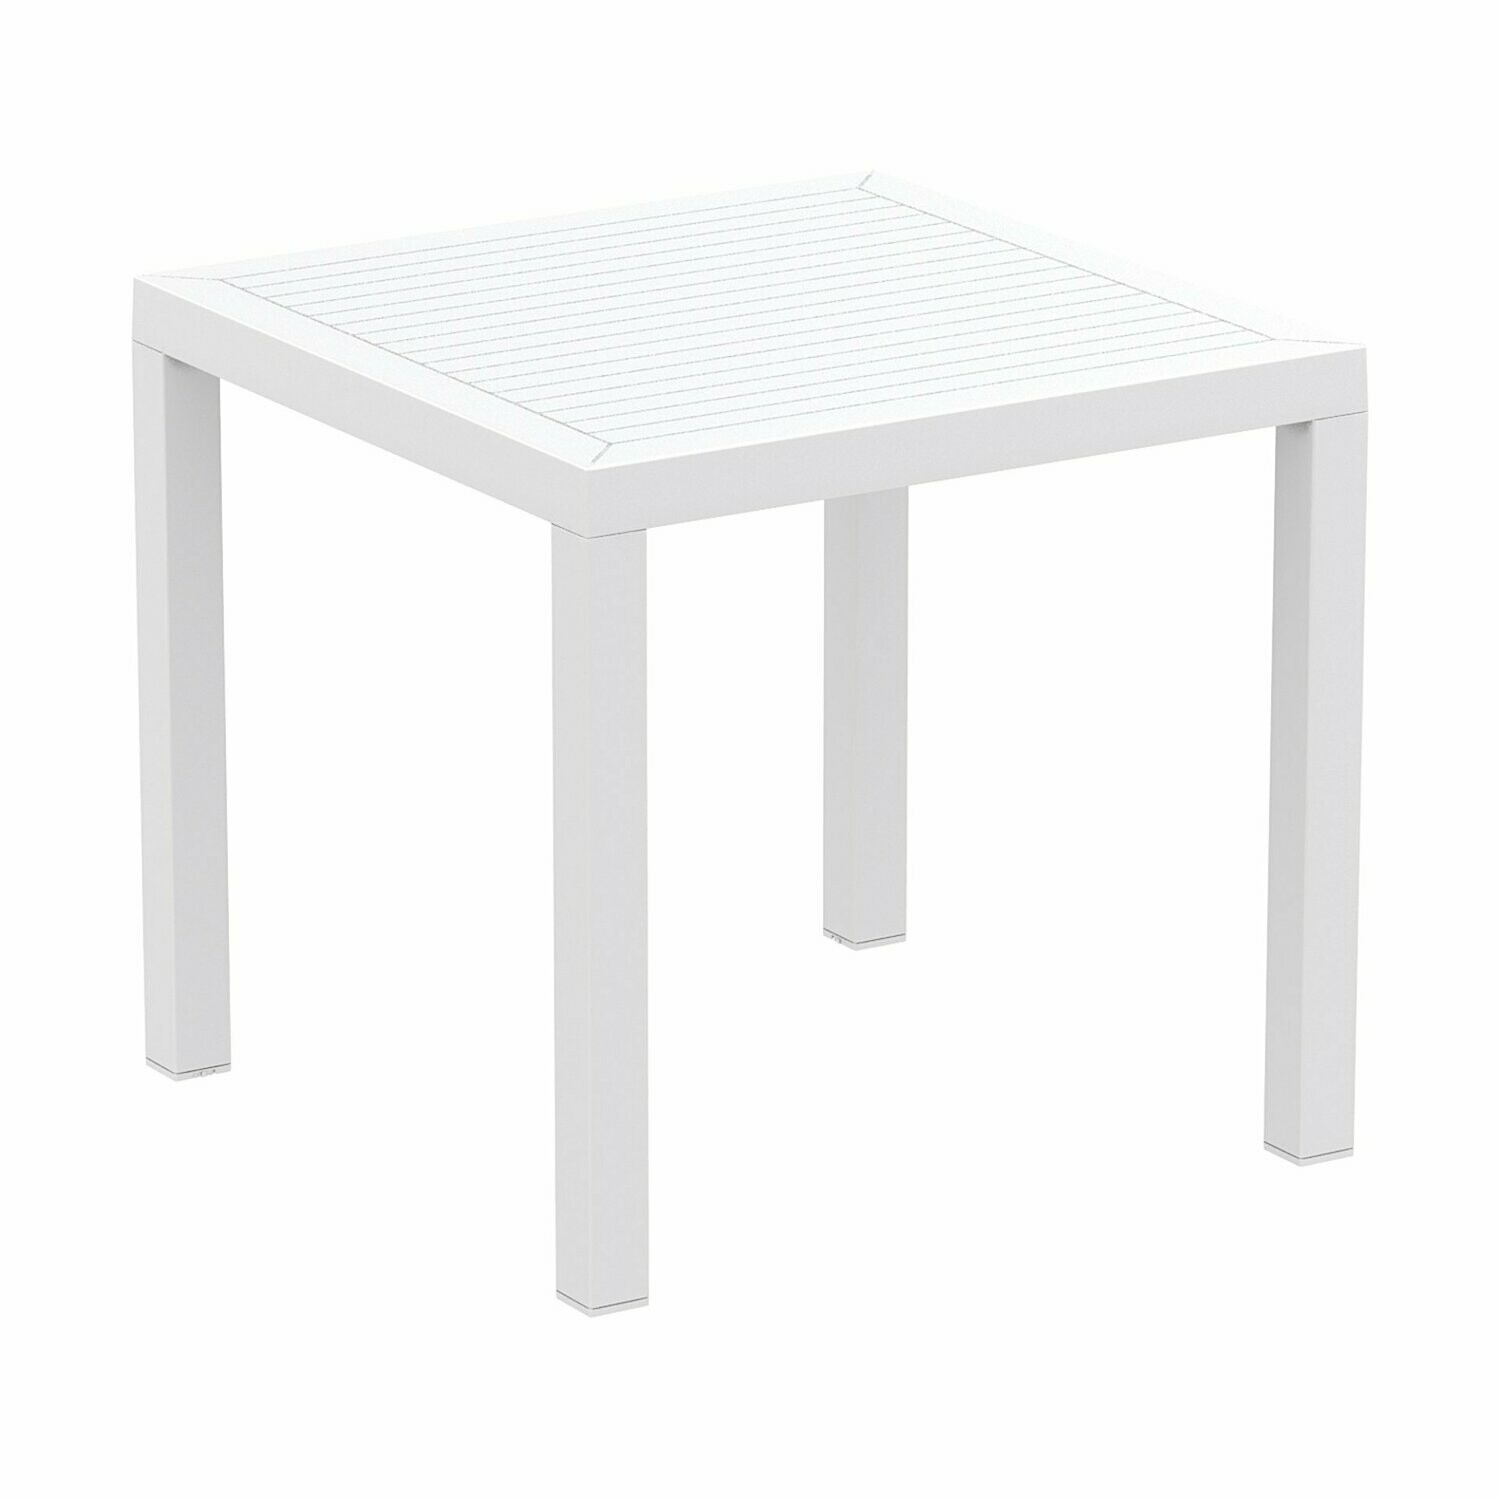 Ares Square Table